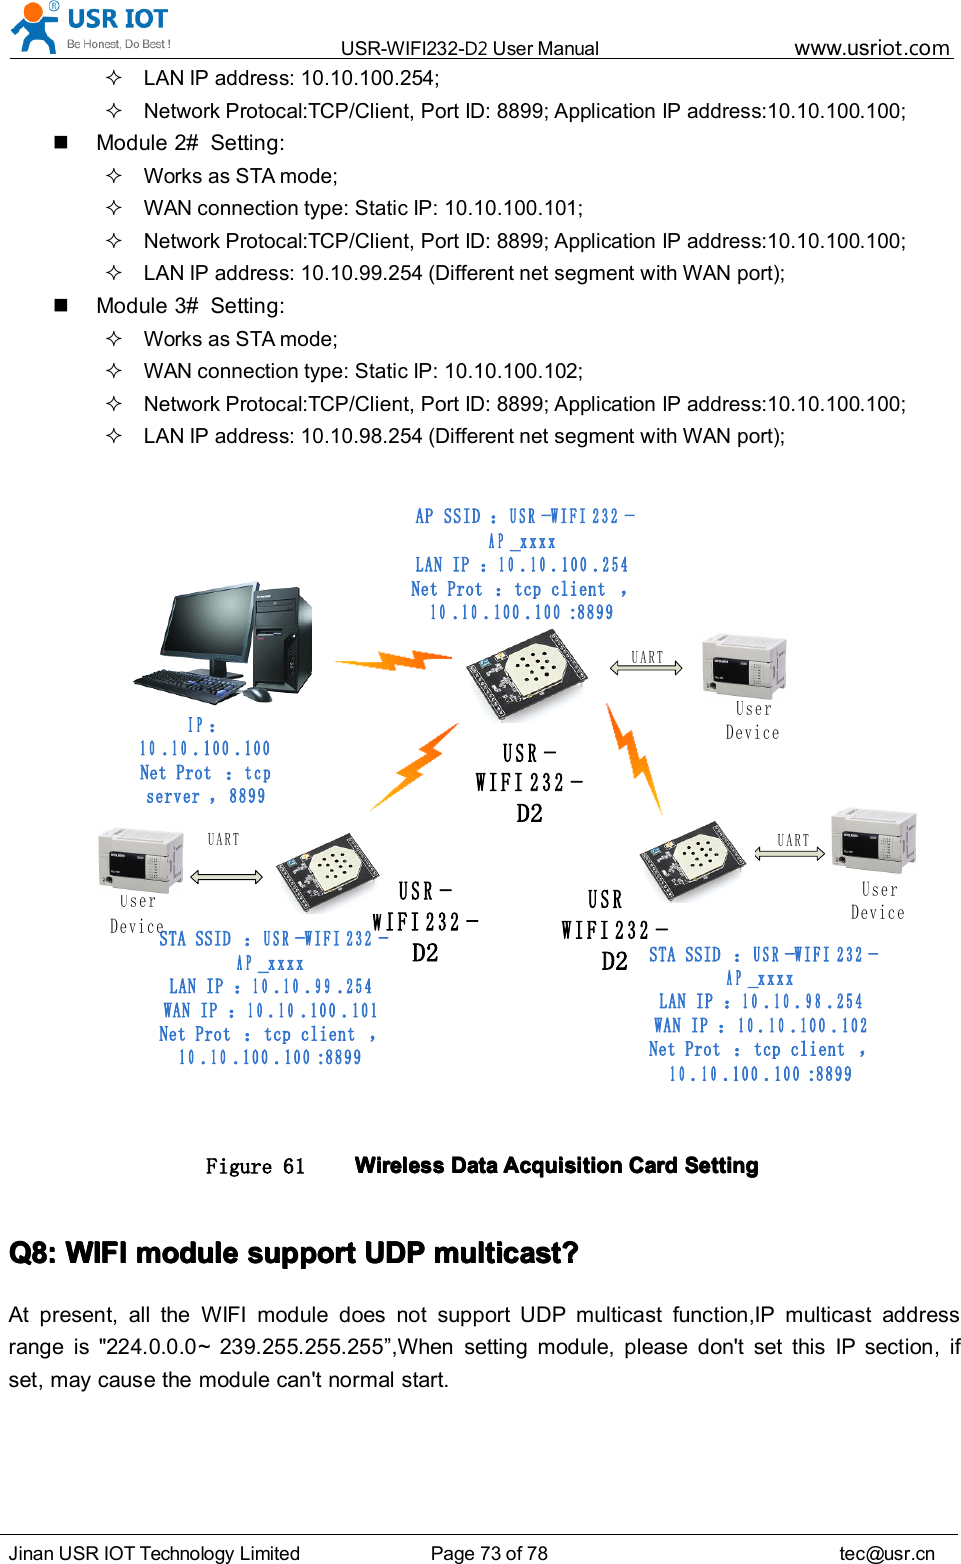 USR-WIFI232- D2 User Manual www.usr iot .comJinan USR IOT Technology Limited Page 73 of 78 tec@usr.cnLAN IP address: 10.10.100.254;Network Protocal:TCP/Client, Port ID: 8899; Application IP address:10.10.100.100;Module 2# Setting:Works as STA mode;WAN connection type: Static IP: 10.10.100.101;Network Protocal:TCP/Client, Port ID: 8899; Application IP address:10.10.100.100;LAN IP address: 10.10.99.254 (Different net segment with WAN port);Module 3# Setting:Works as STA mode;WAN connection type: Static IP: 10.10.100.102;Network Protocal:TCP/Client, Port ID: 8899; Application IP address:10.10.100.100;LAN IP address: 10.10.98.254 (Different net segment with WAN port);USR-WIFI232-D 2UARTUSR-WIFI232-D 2UARTUARTIP：10.10.100.100Net Prot：tcp server，8899STA SSID：USR-WIFI232-AP_xxxxLAN IP：10.10.99.254WAN IP：10.10.100.101Net Prot：tcp client，10.10.100.100:8899STA SSID：USR-WIFI232-AP_xxxxLAN IP：10.10.98.254WAN IP：10.10.100.102Net Prot：tcp client，10.10.100.100:8899AP SSID：USR-WIFI232-AP_xxxxLAN IP：10.10.100.254Net Prot：tcp client，10.10.100.100:8899User DeviceUser DeviceUser DeviceUSR-WIFI232-D 2Figure 61 WirelessWirelessWirelessWireless DataDataDataData AcquisitionAcquisitionAcquisitionAcquisition CardCardCardCard SettingSettingSettingSettingQ8:Q8:Q8:Q8: WIFIWIFIWIFIWIFI modulemodulemodulemodule supportsupportsupportsupport UDPUDPUDPUDP multicast?multicast?multicast?multicast?At present, all the WIFI module does not support UDP multicast function,IP multicast addressrange is &quot; 224.0.0.0 ~ 239.255.255.255 ” , When setting module, please don&apos;t set this IP section, ifset, may cause the module can&apos;t normal start.